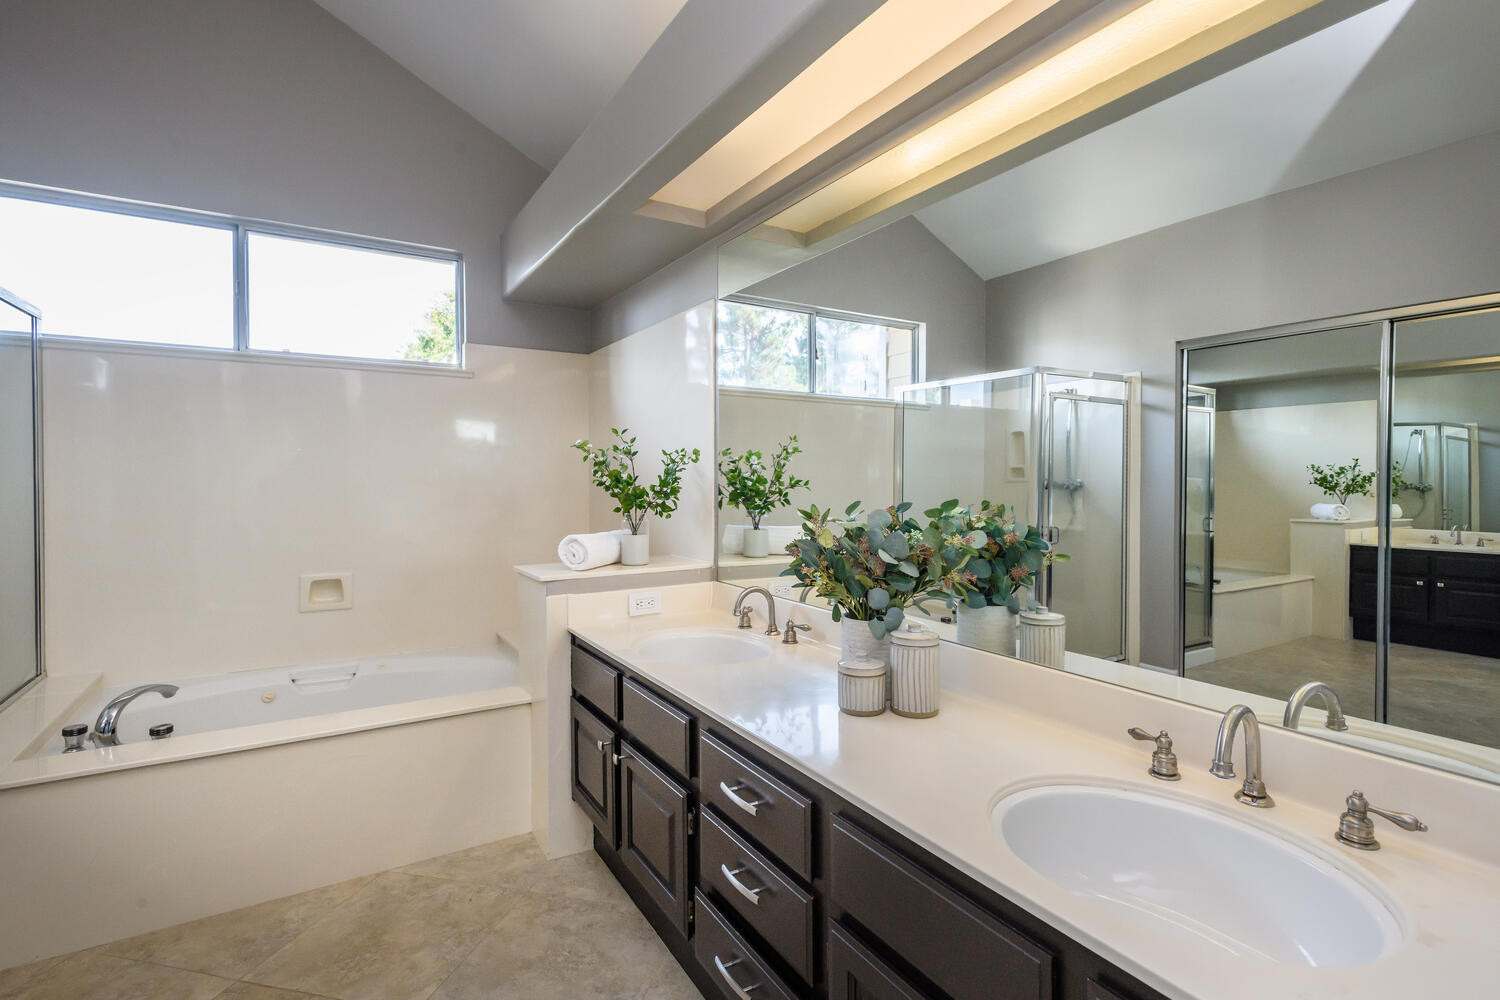 Double vanity in Lighthouse Cove area in Redwood Shores.